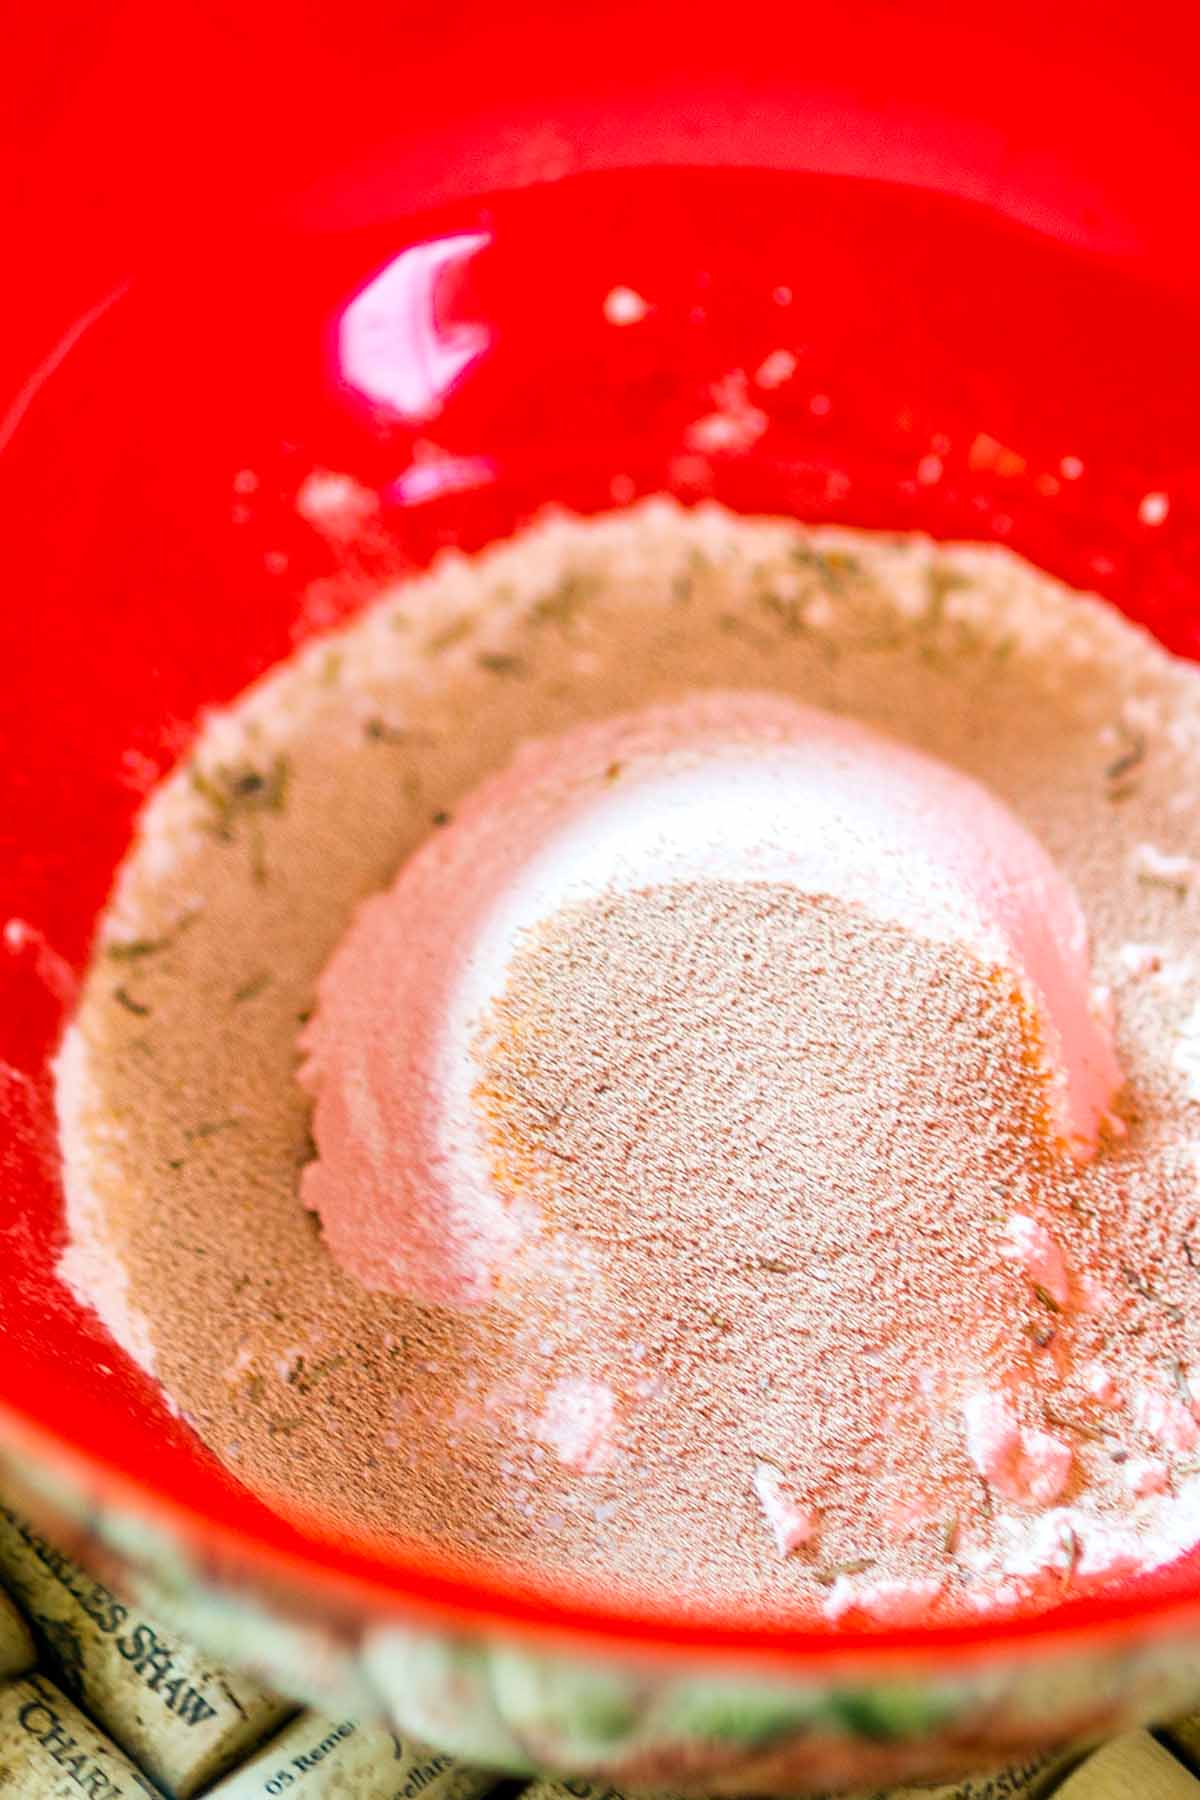 Flour and yeast in a red bowl.